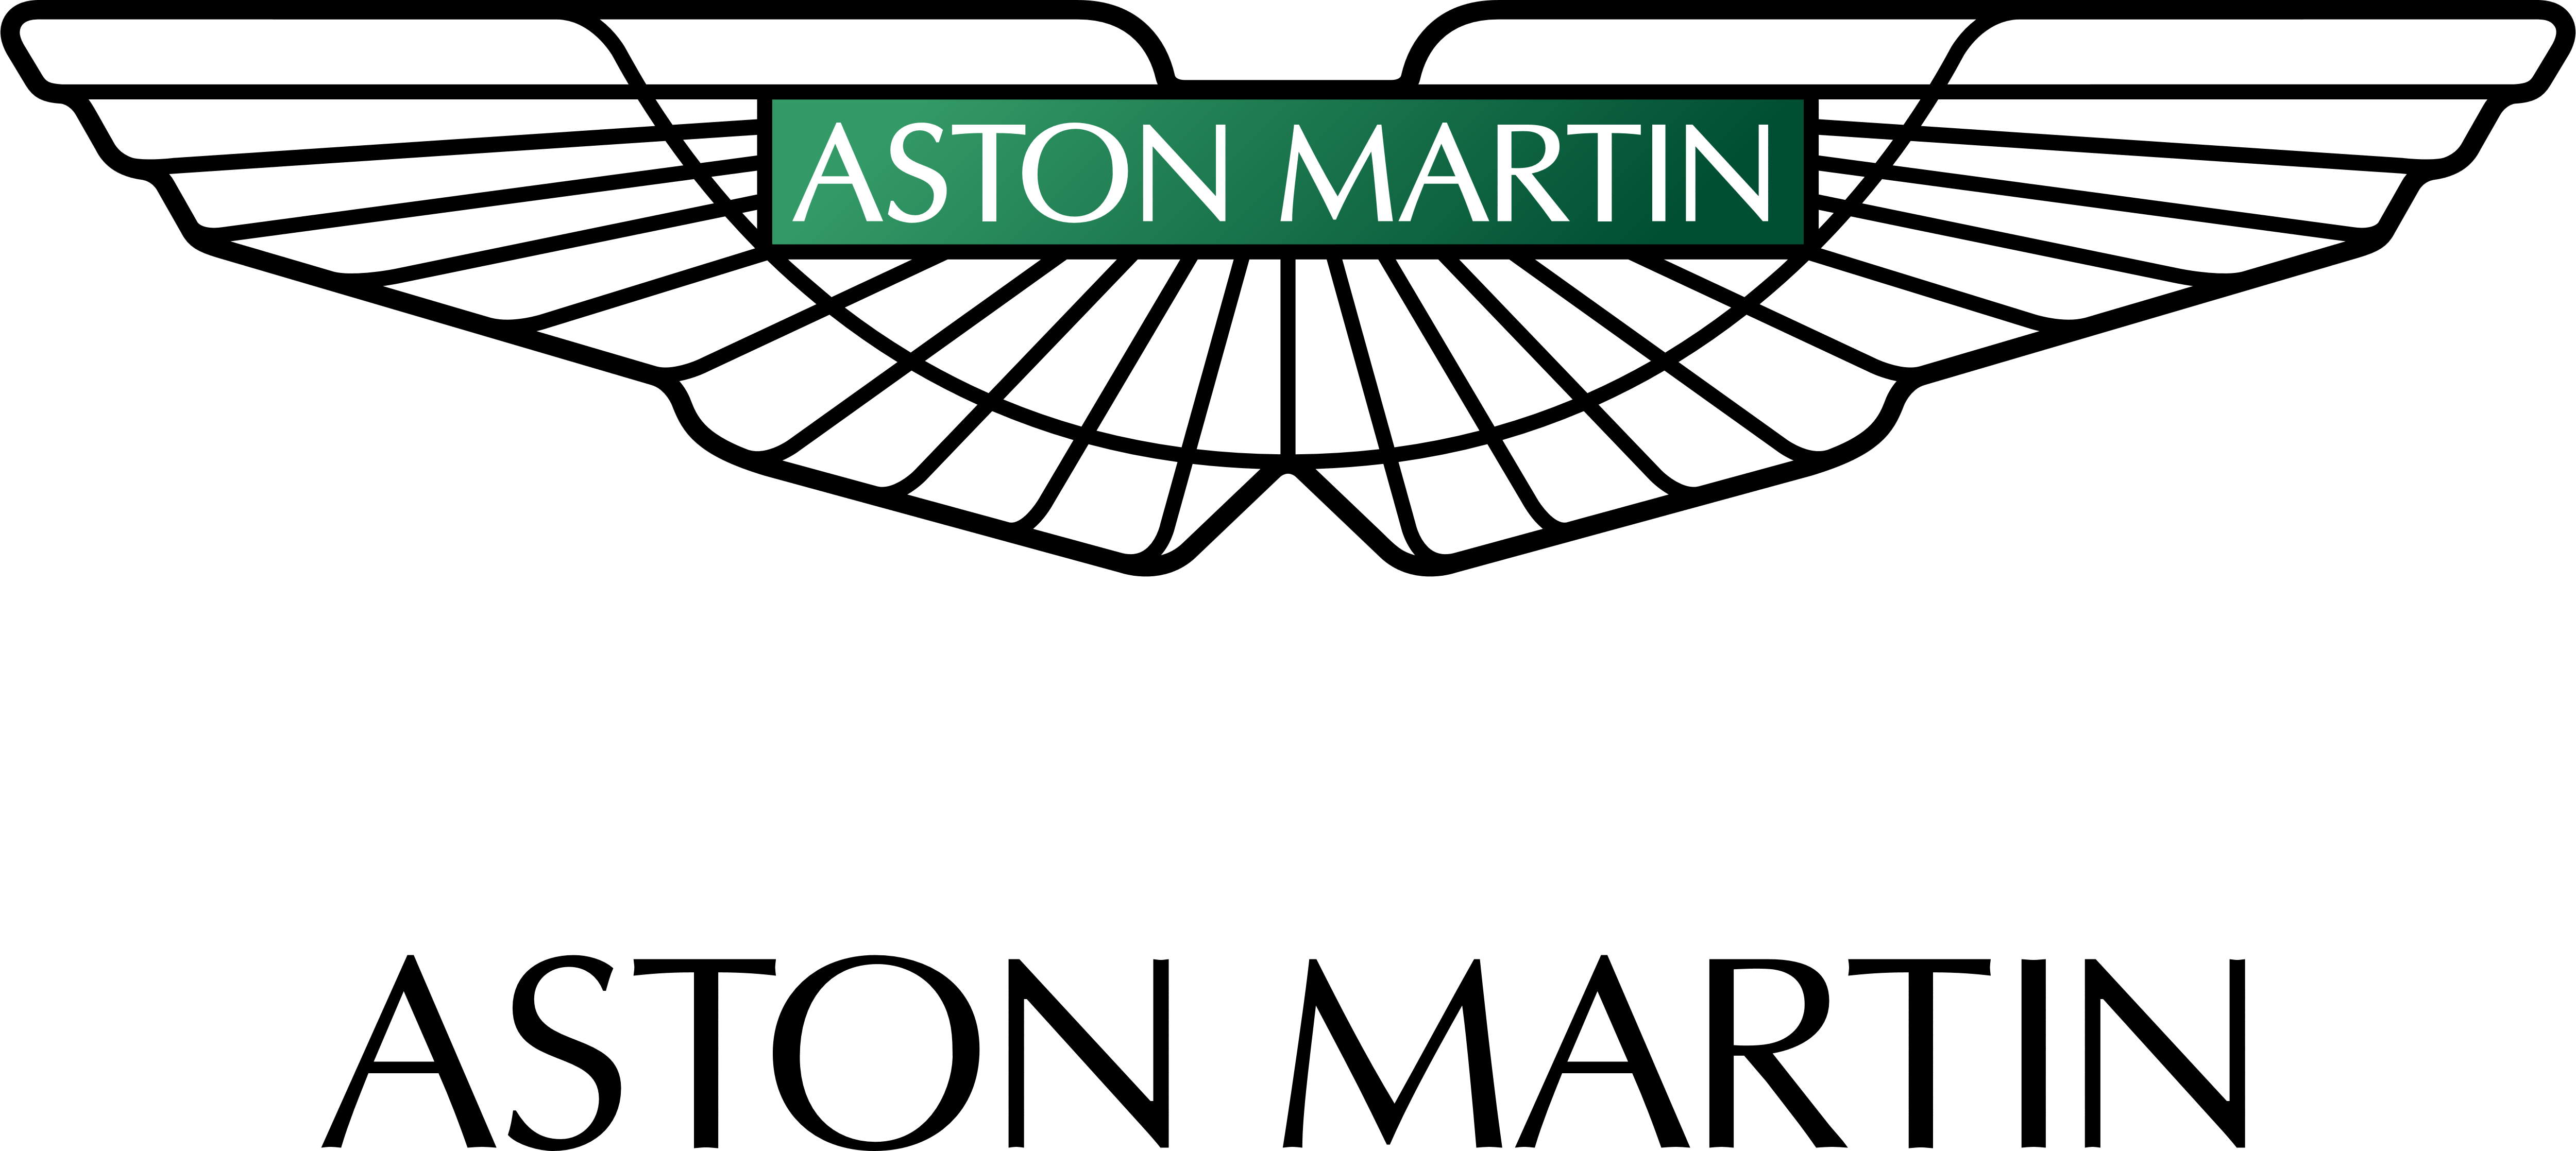 Aston Martin | Brands Of The 